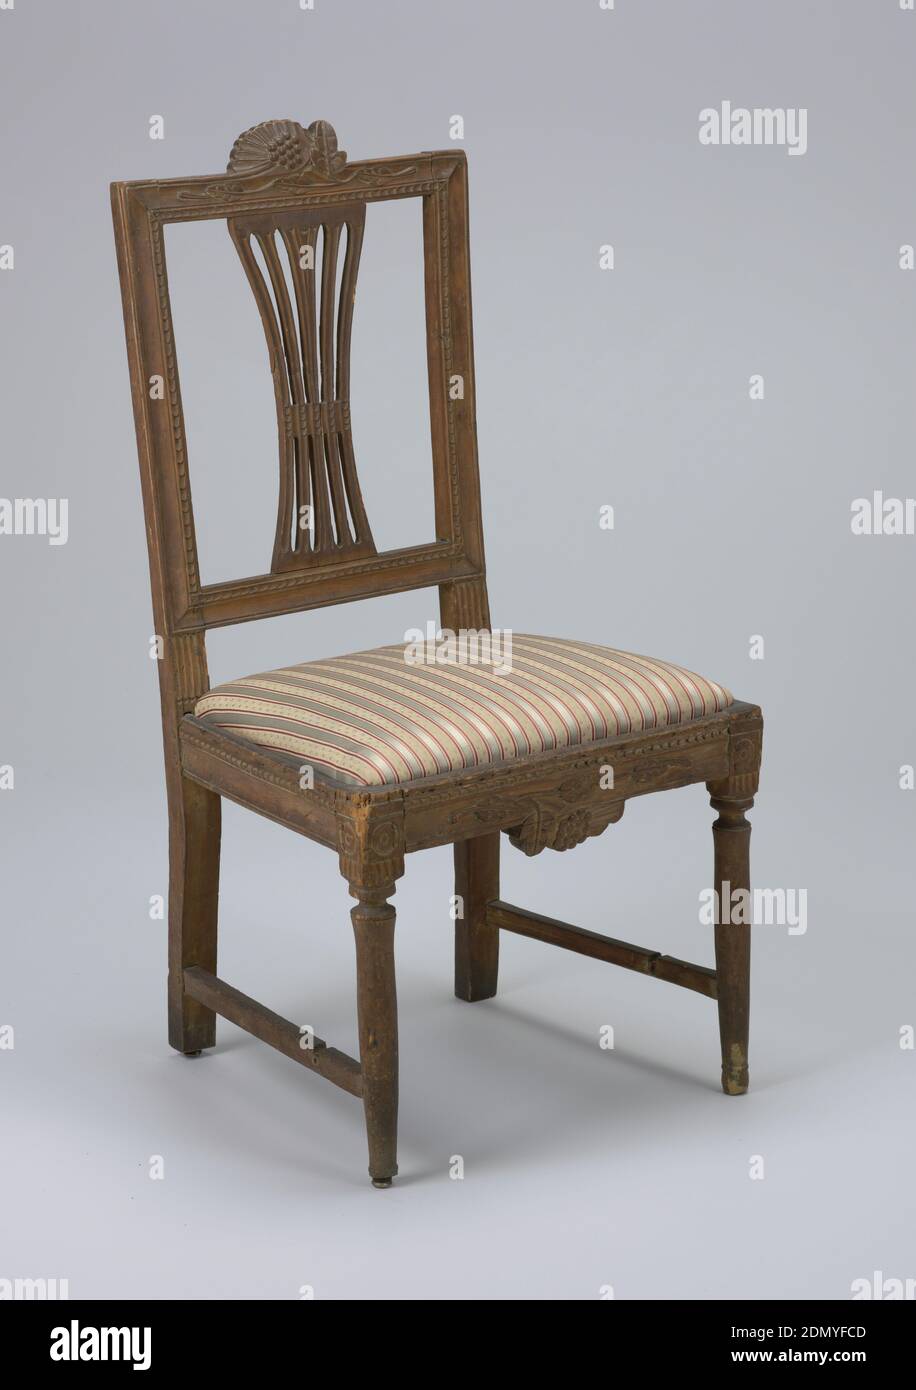 https://c8.alamy.com/comp/2DMYFCD/side-chair-carved-wood-rectangular-open-back-the-top-rail-carved-with-a-design-of-grapes-splat-composed-of-five-splints-inward-curving-and-fused-centrally-straight-moulded-seat-rails-the-front-grape-carved-sweden-late-18th-century-furniture-decorative-arts-side-chair-2DMYFCD.jpg